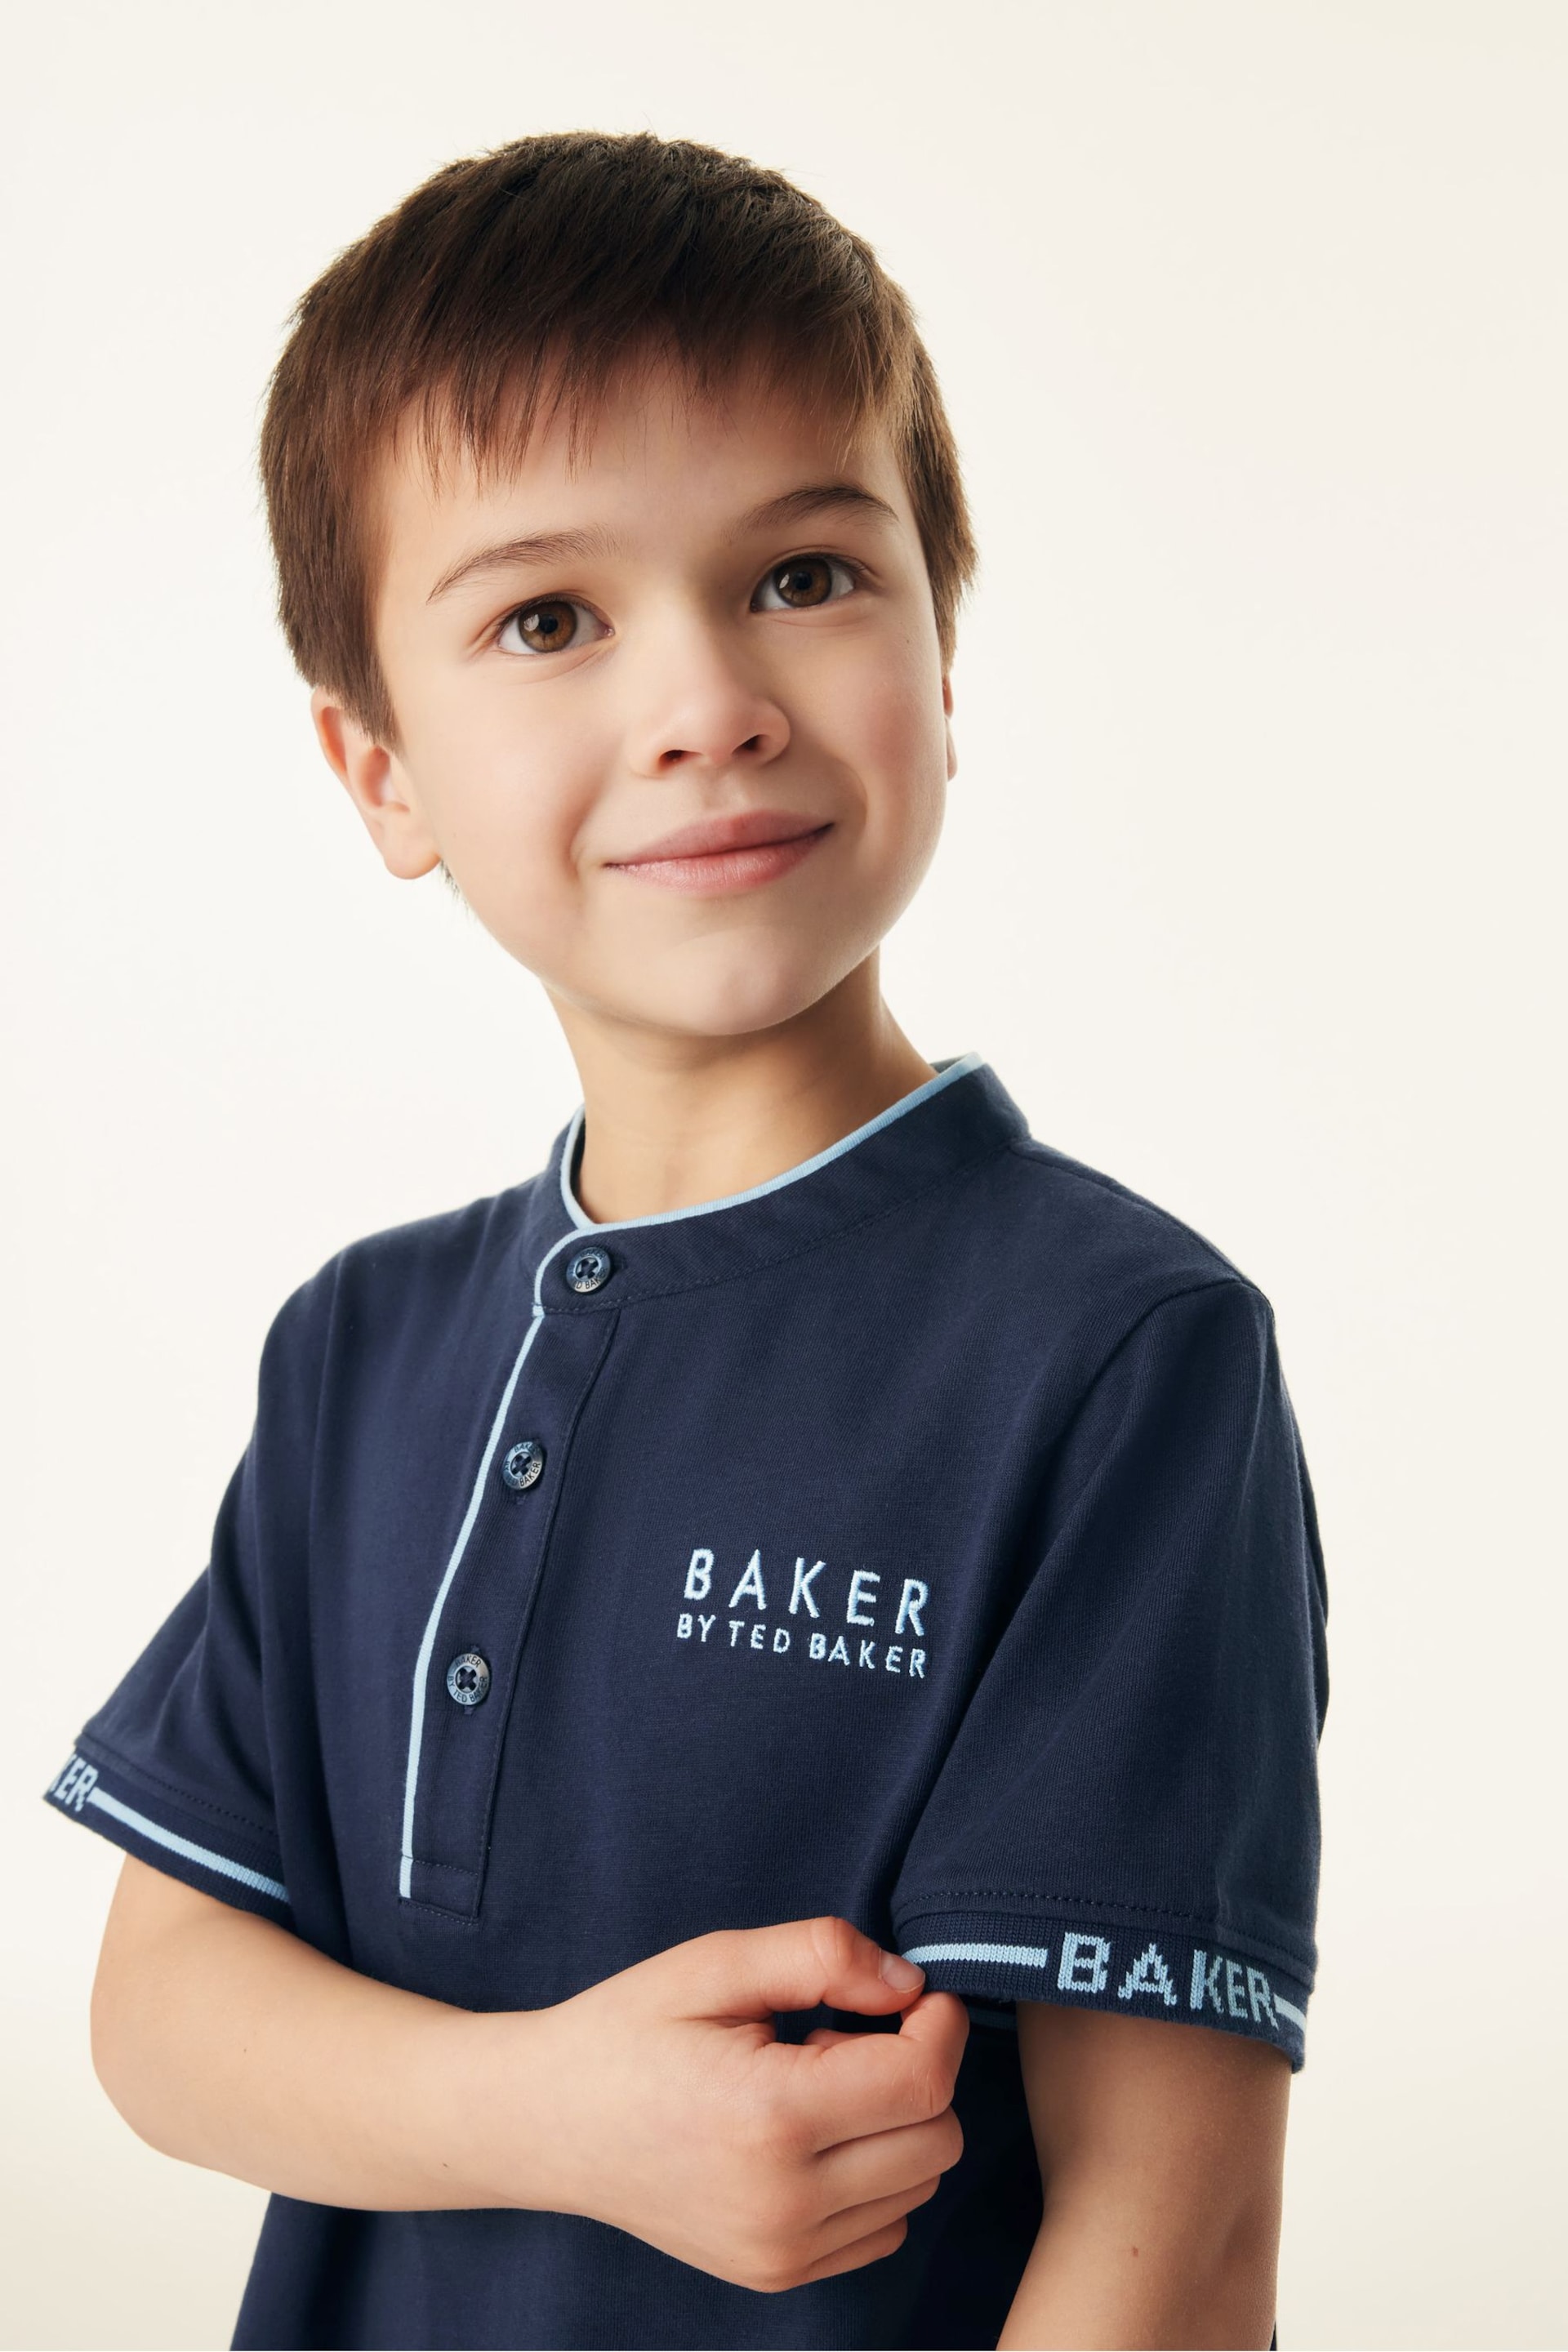 Baker by Ted Baker Henley T-Shirt - Image 4 of 12